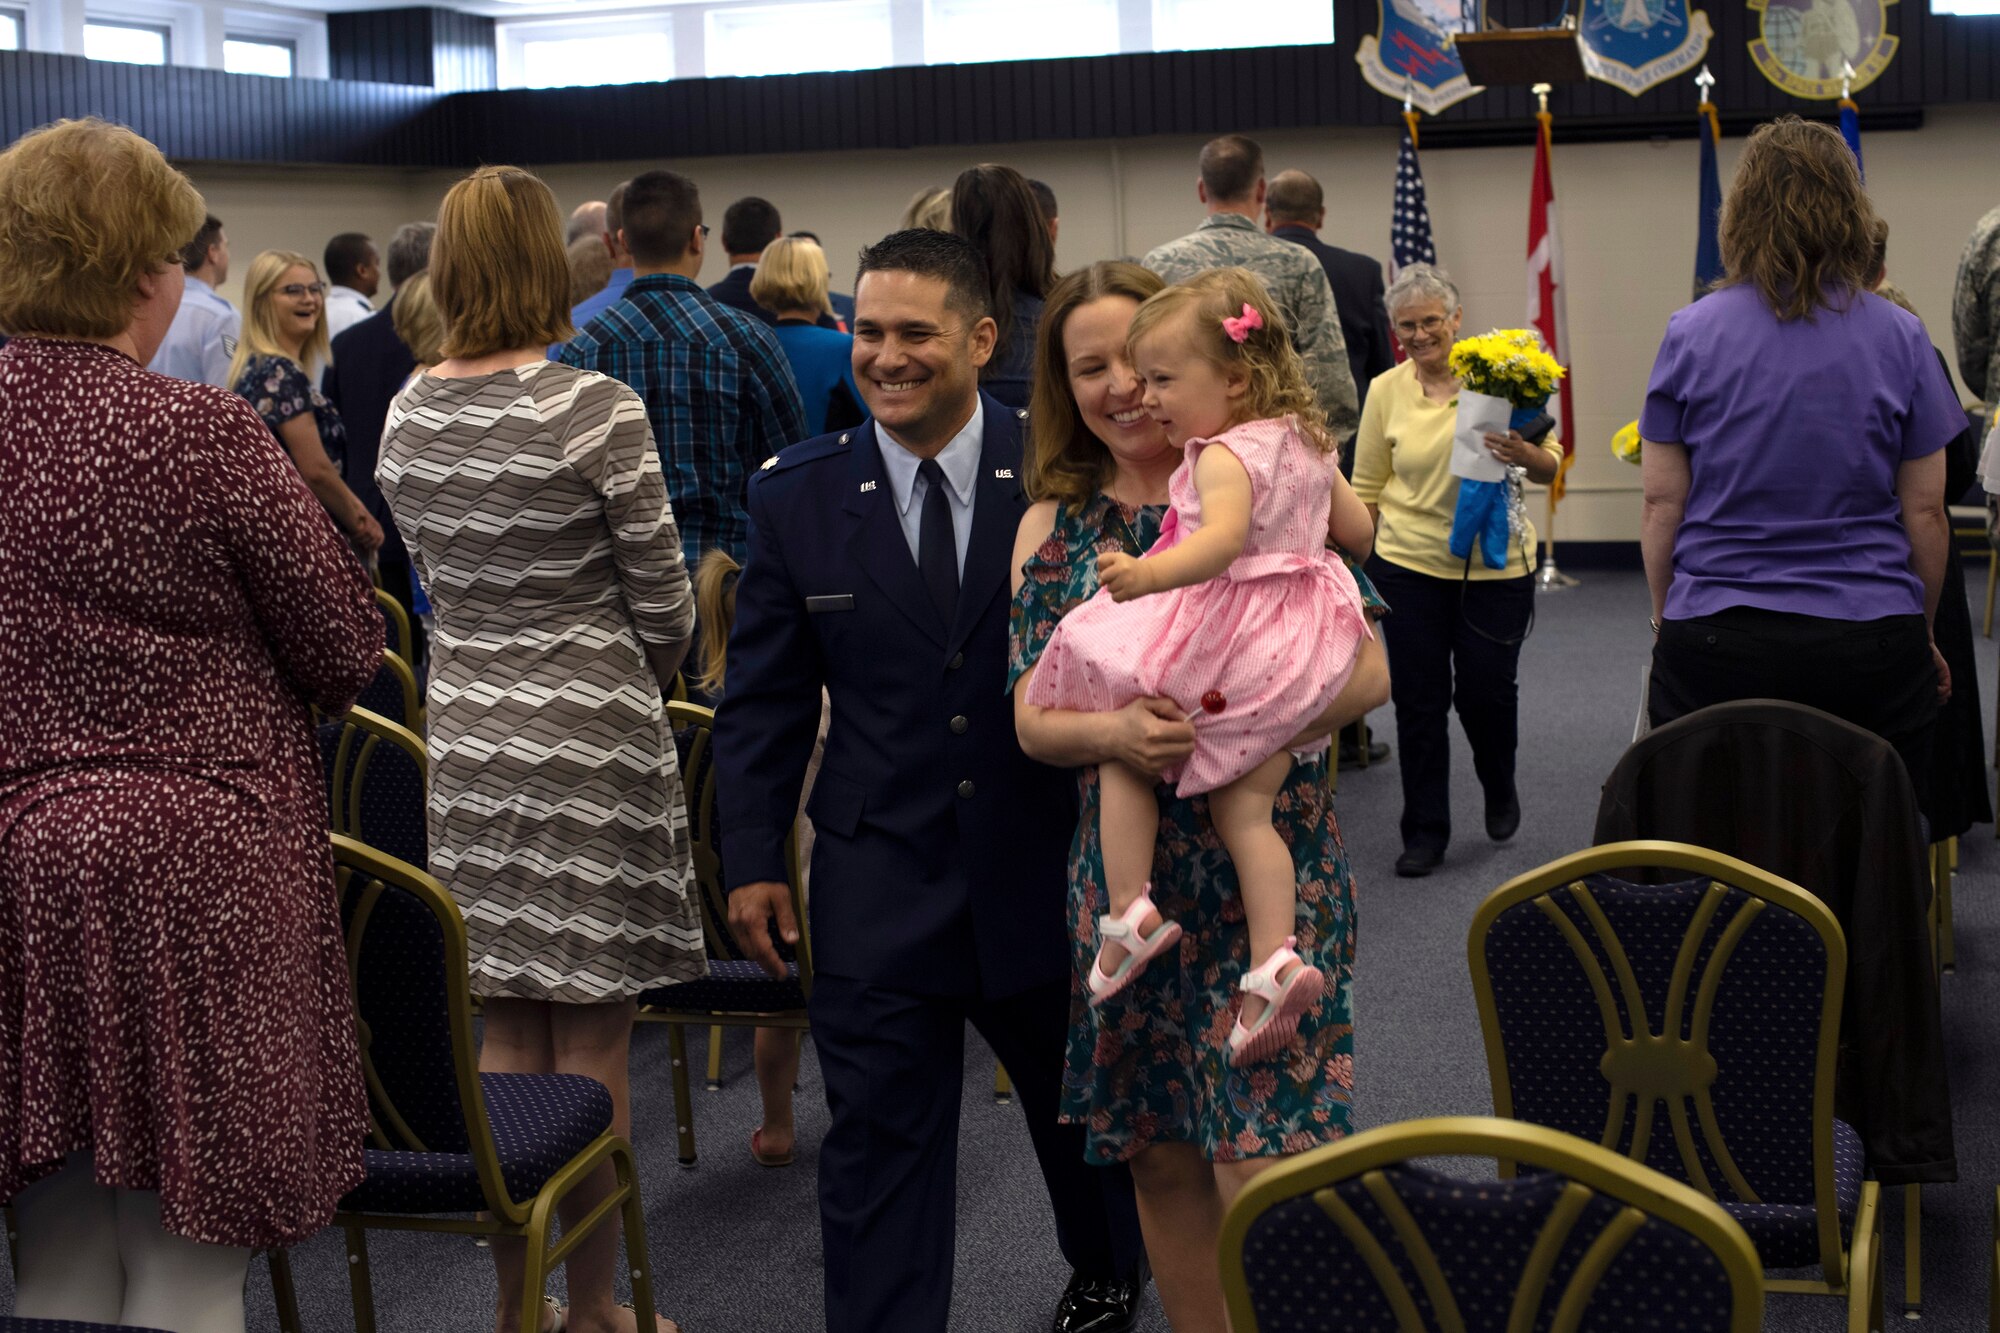 Lt. Col. Ryan Durand, 10th Space Warning Squadron commander, walks away from his change of command ceremony beside his wife and daughter June 11, 2019, on Cavalier Air Force Station, North Dakota. Durand assumed command of the northern-tier base from outgoing commander, Lt. Col. Stephen Hobbs. (U.S. Air Force photo by Senior Airman Elora J. Martinez)